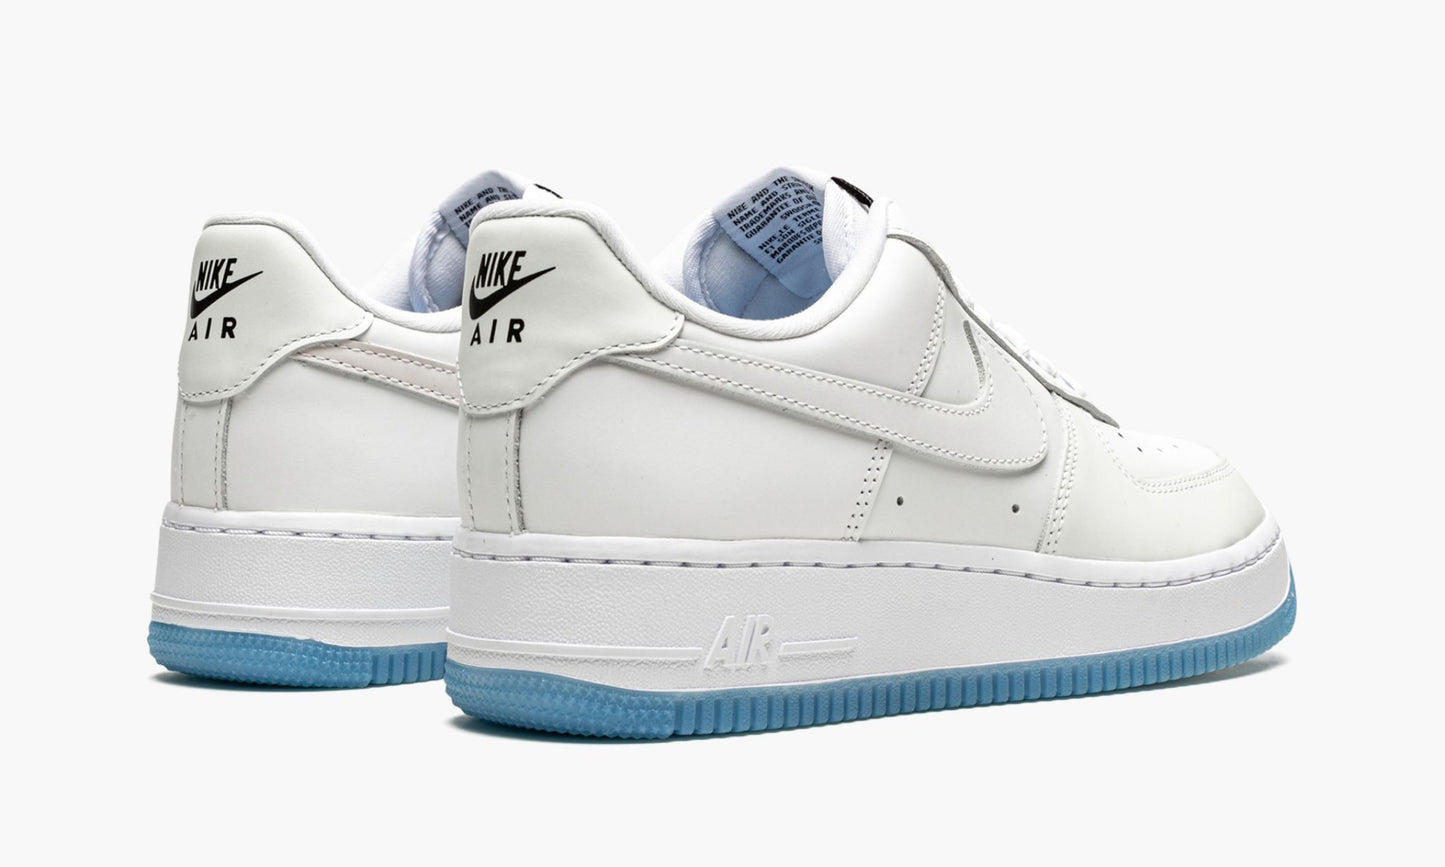 WMNS Air Force 1 Low LX "UV Reactive"